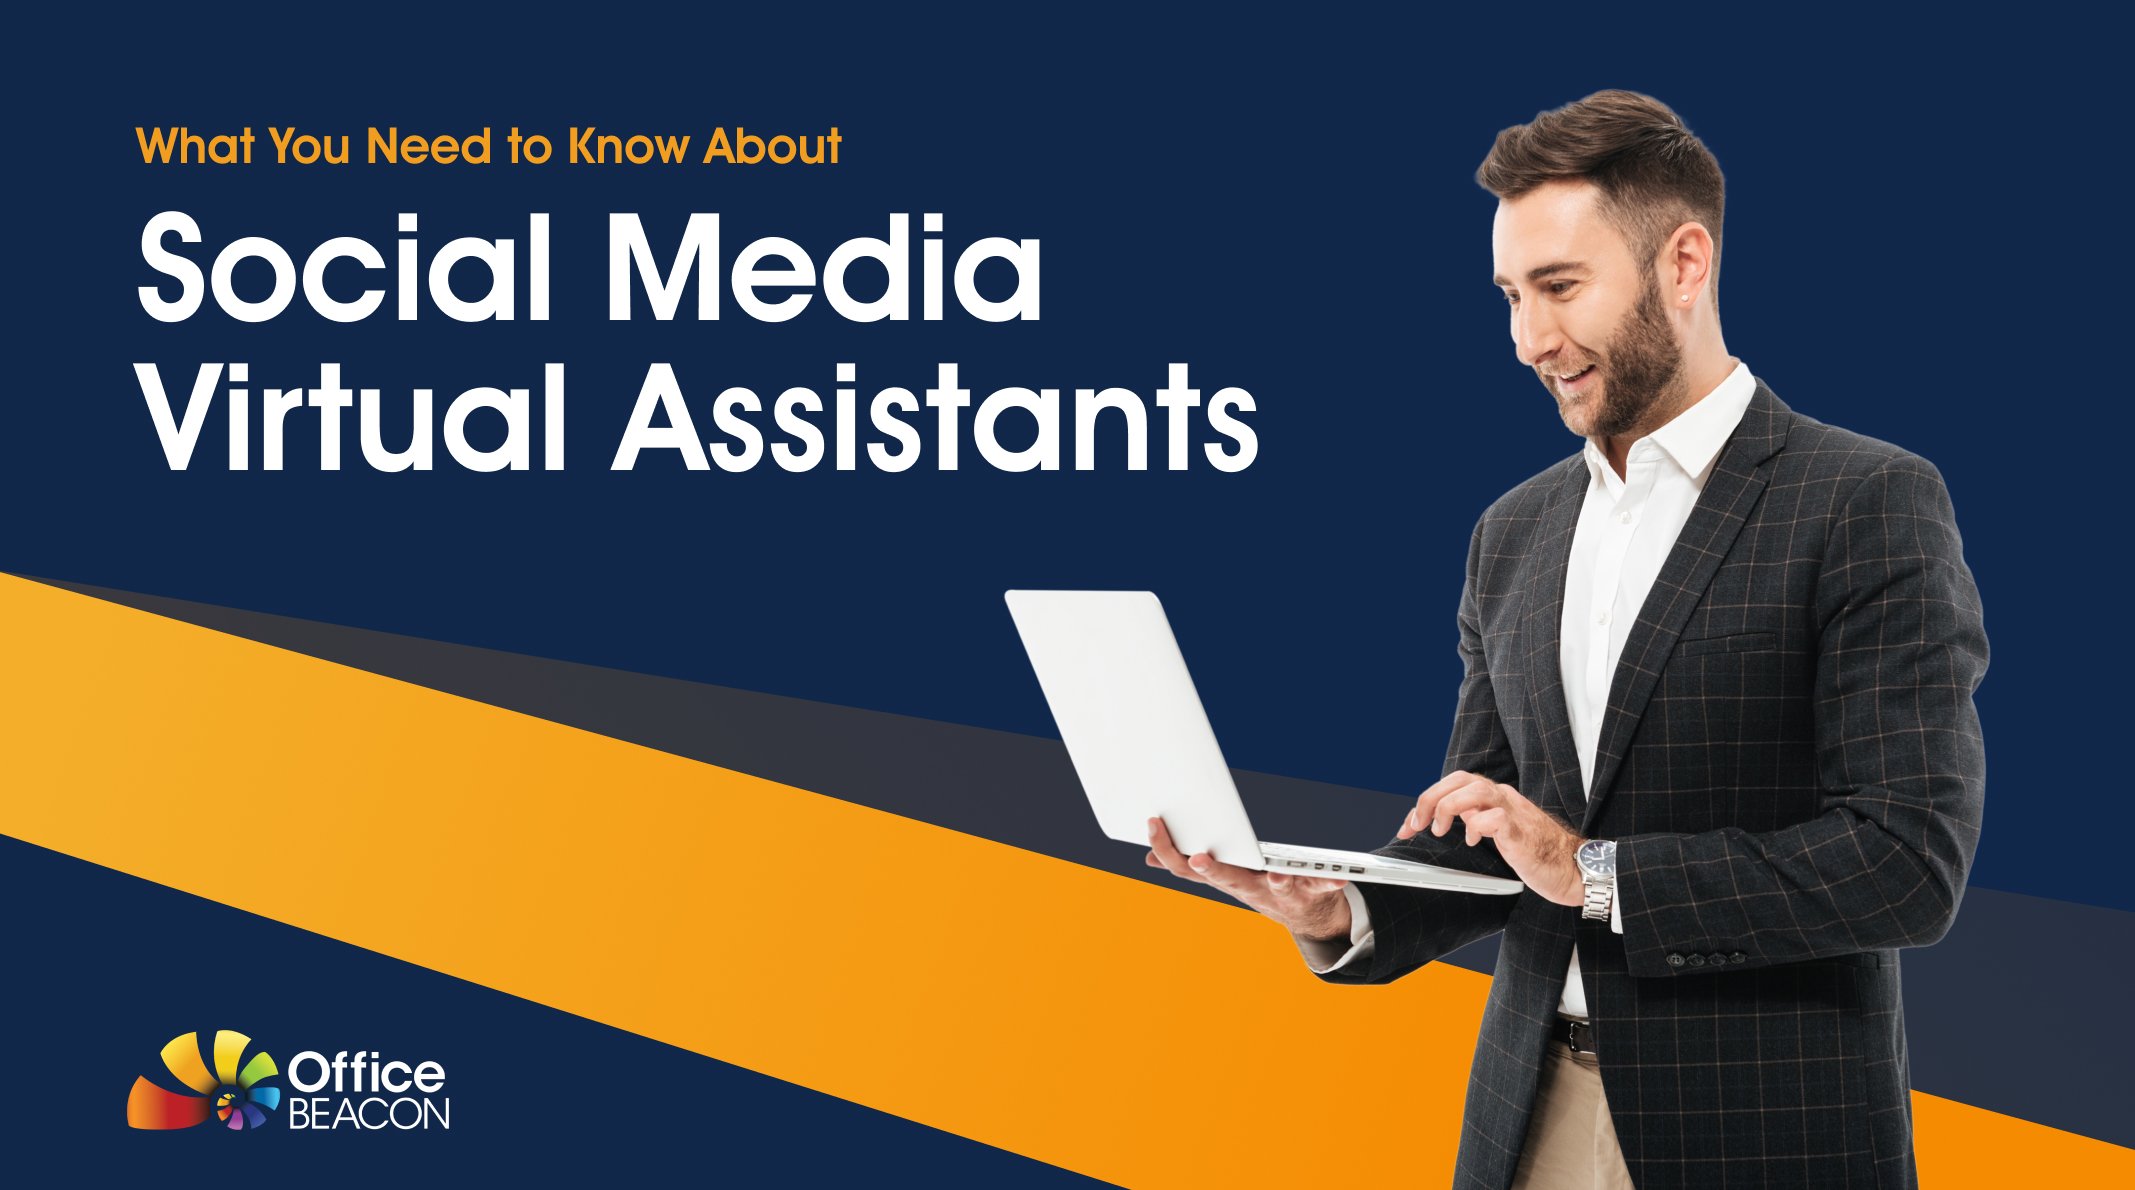 What You Need to Know About Social Media Virtual Assistants